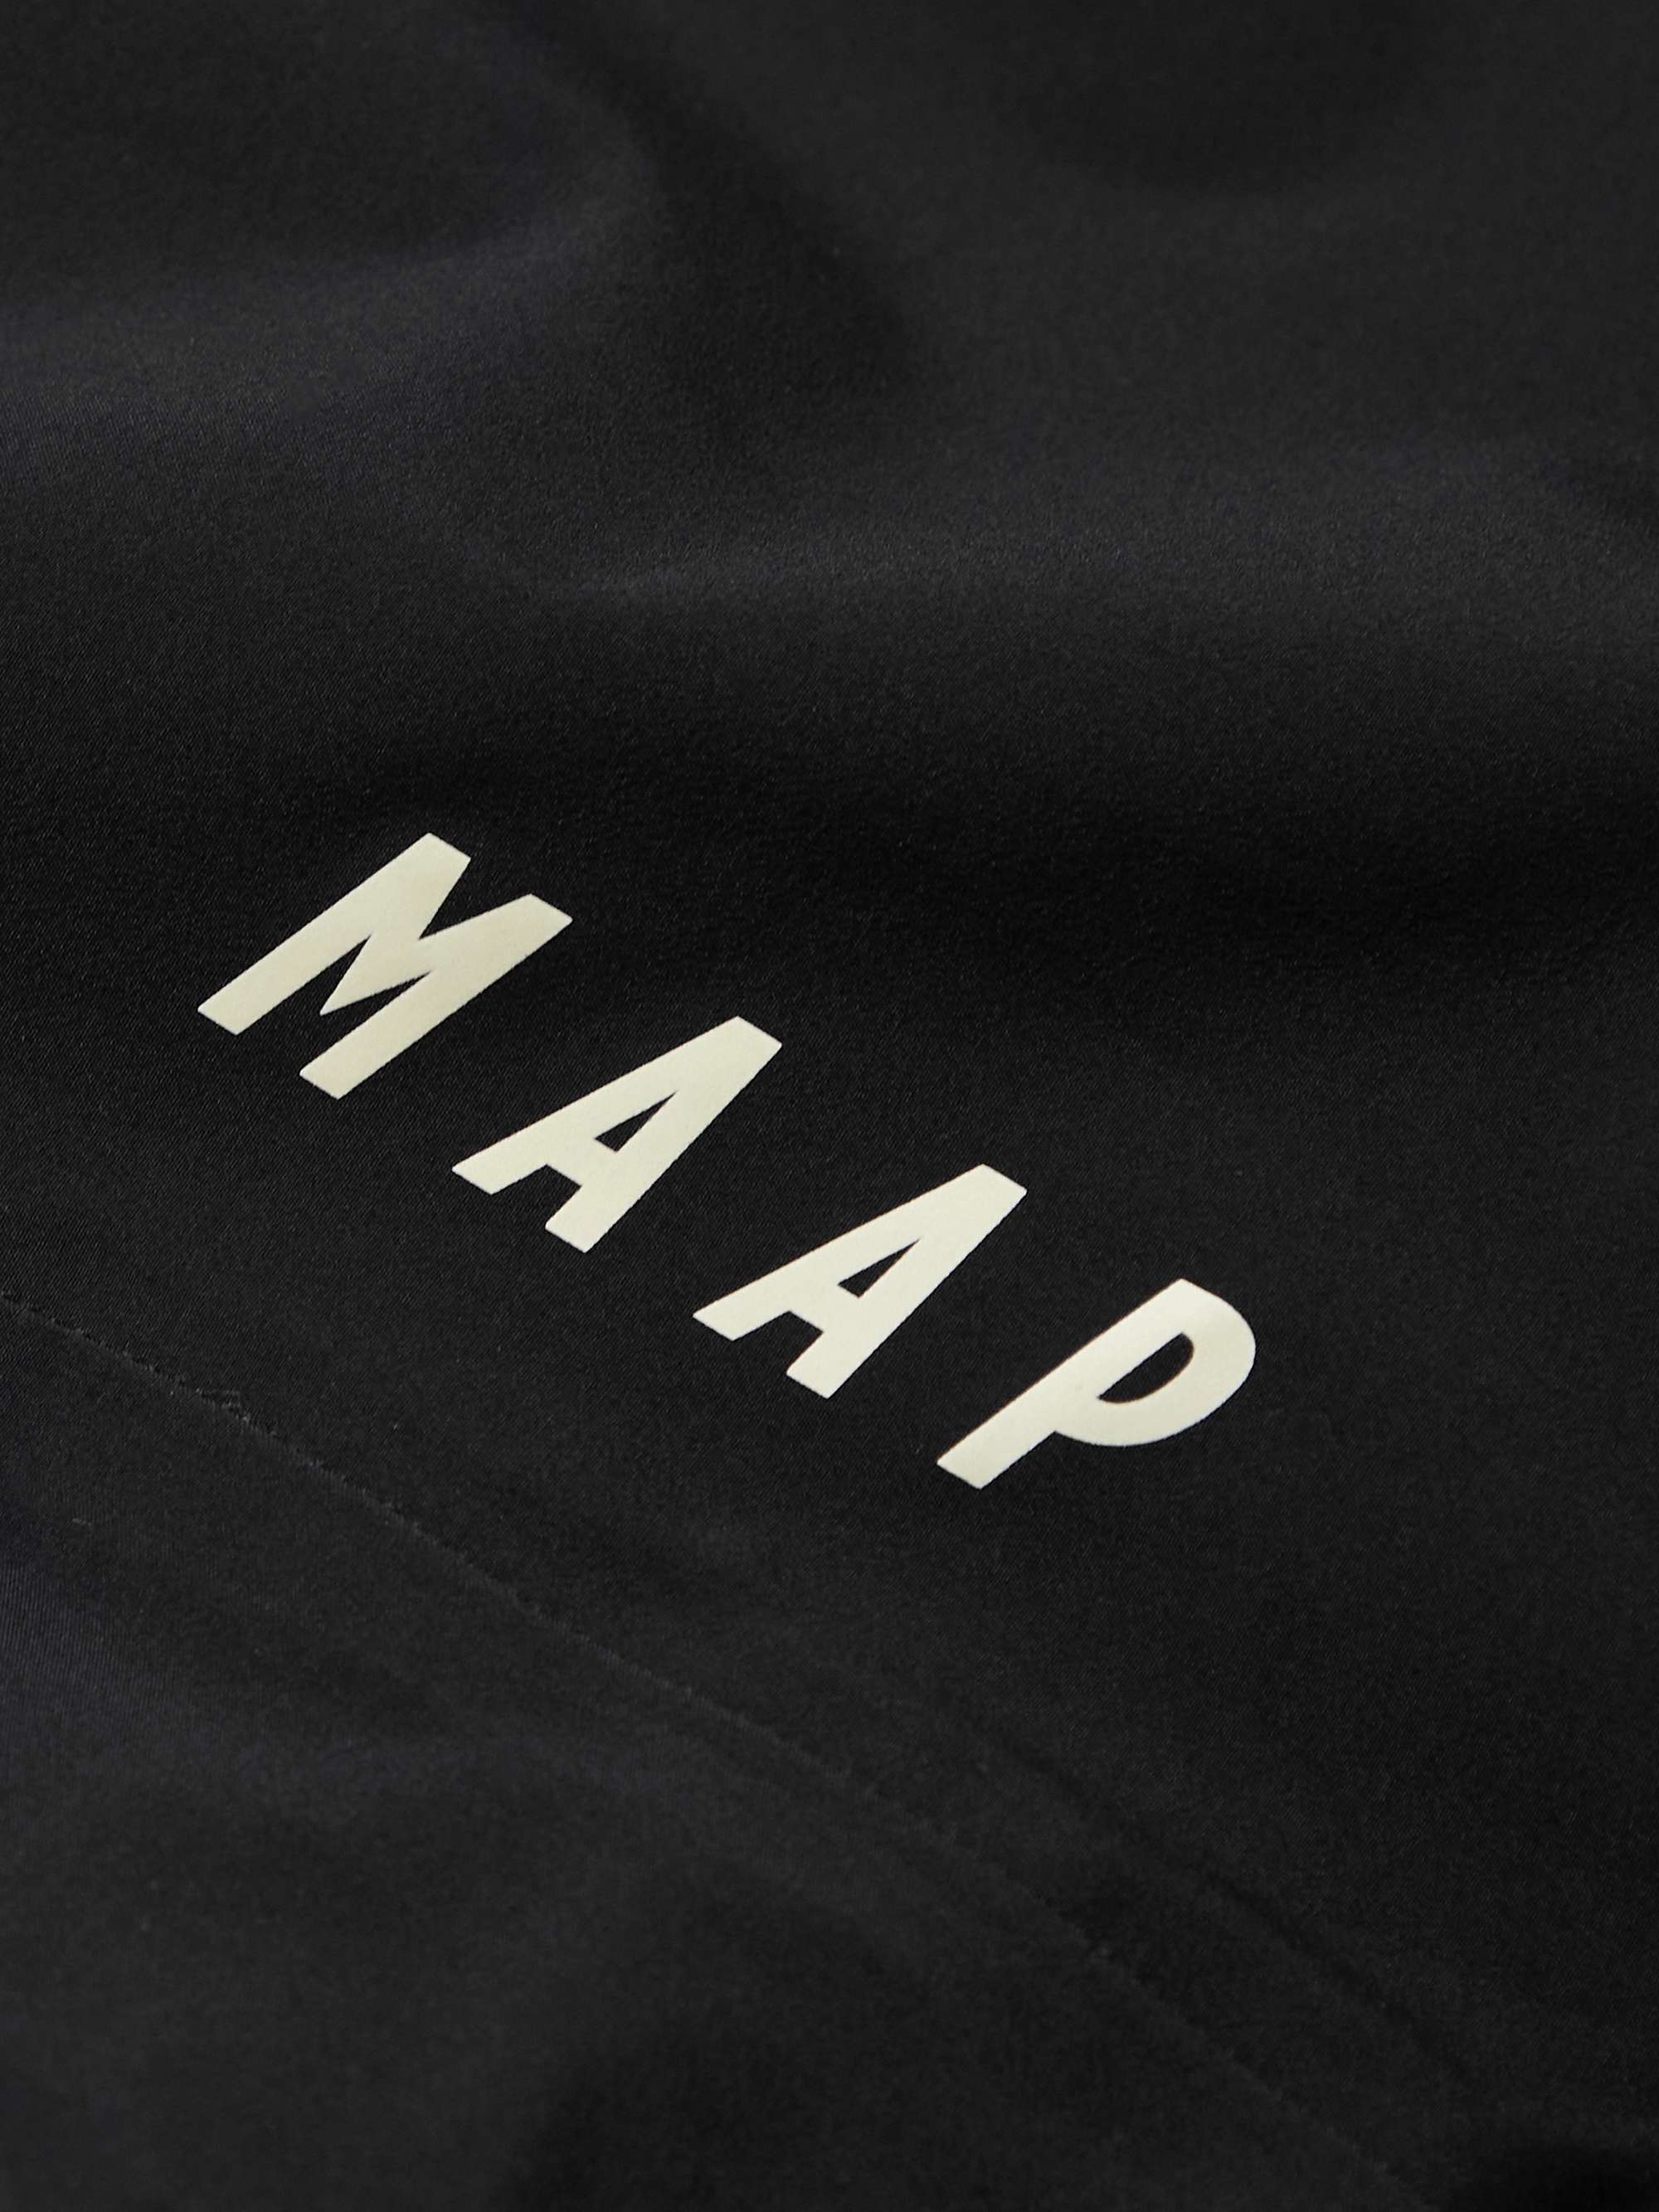 MAAP Prime Stow Slim-Fit Shell Cycling Jacket